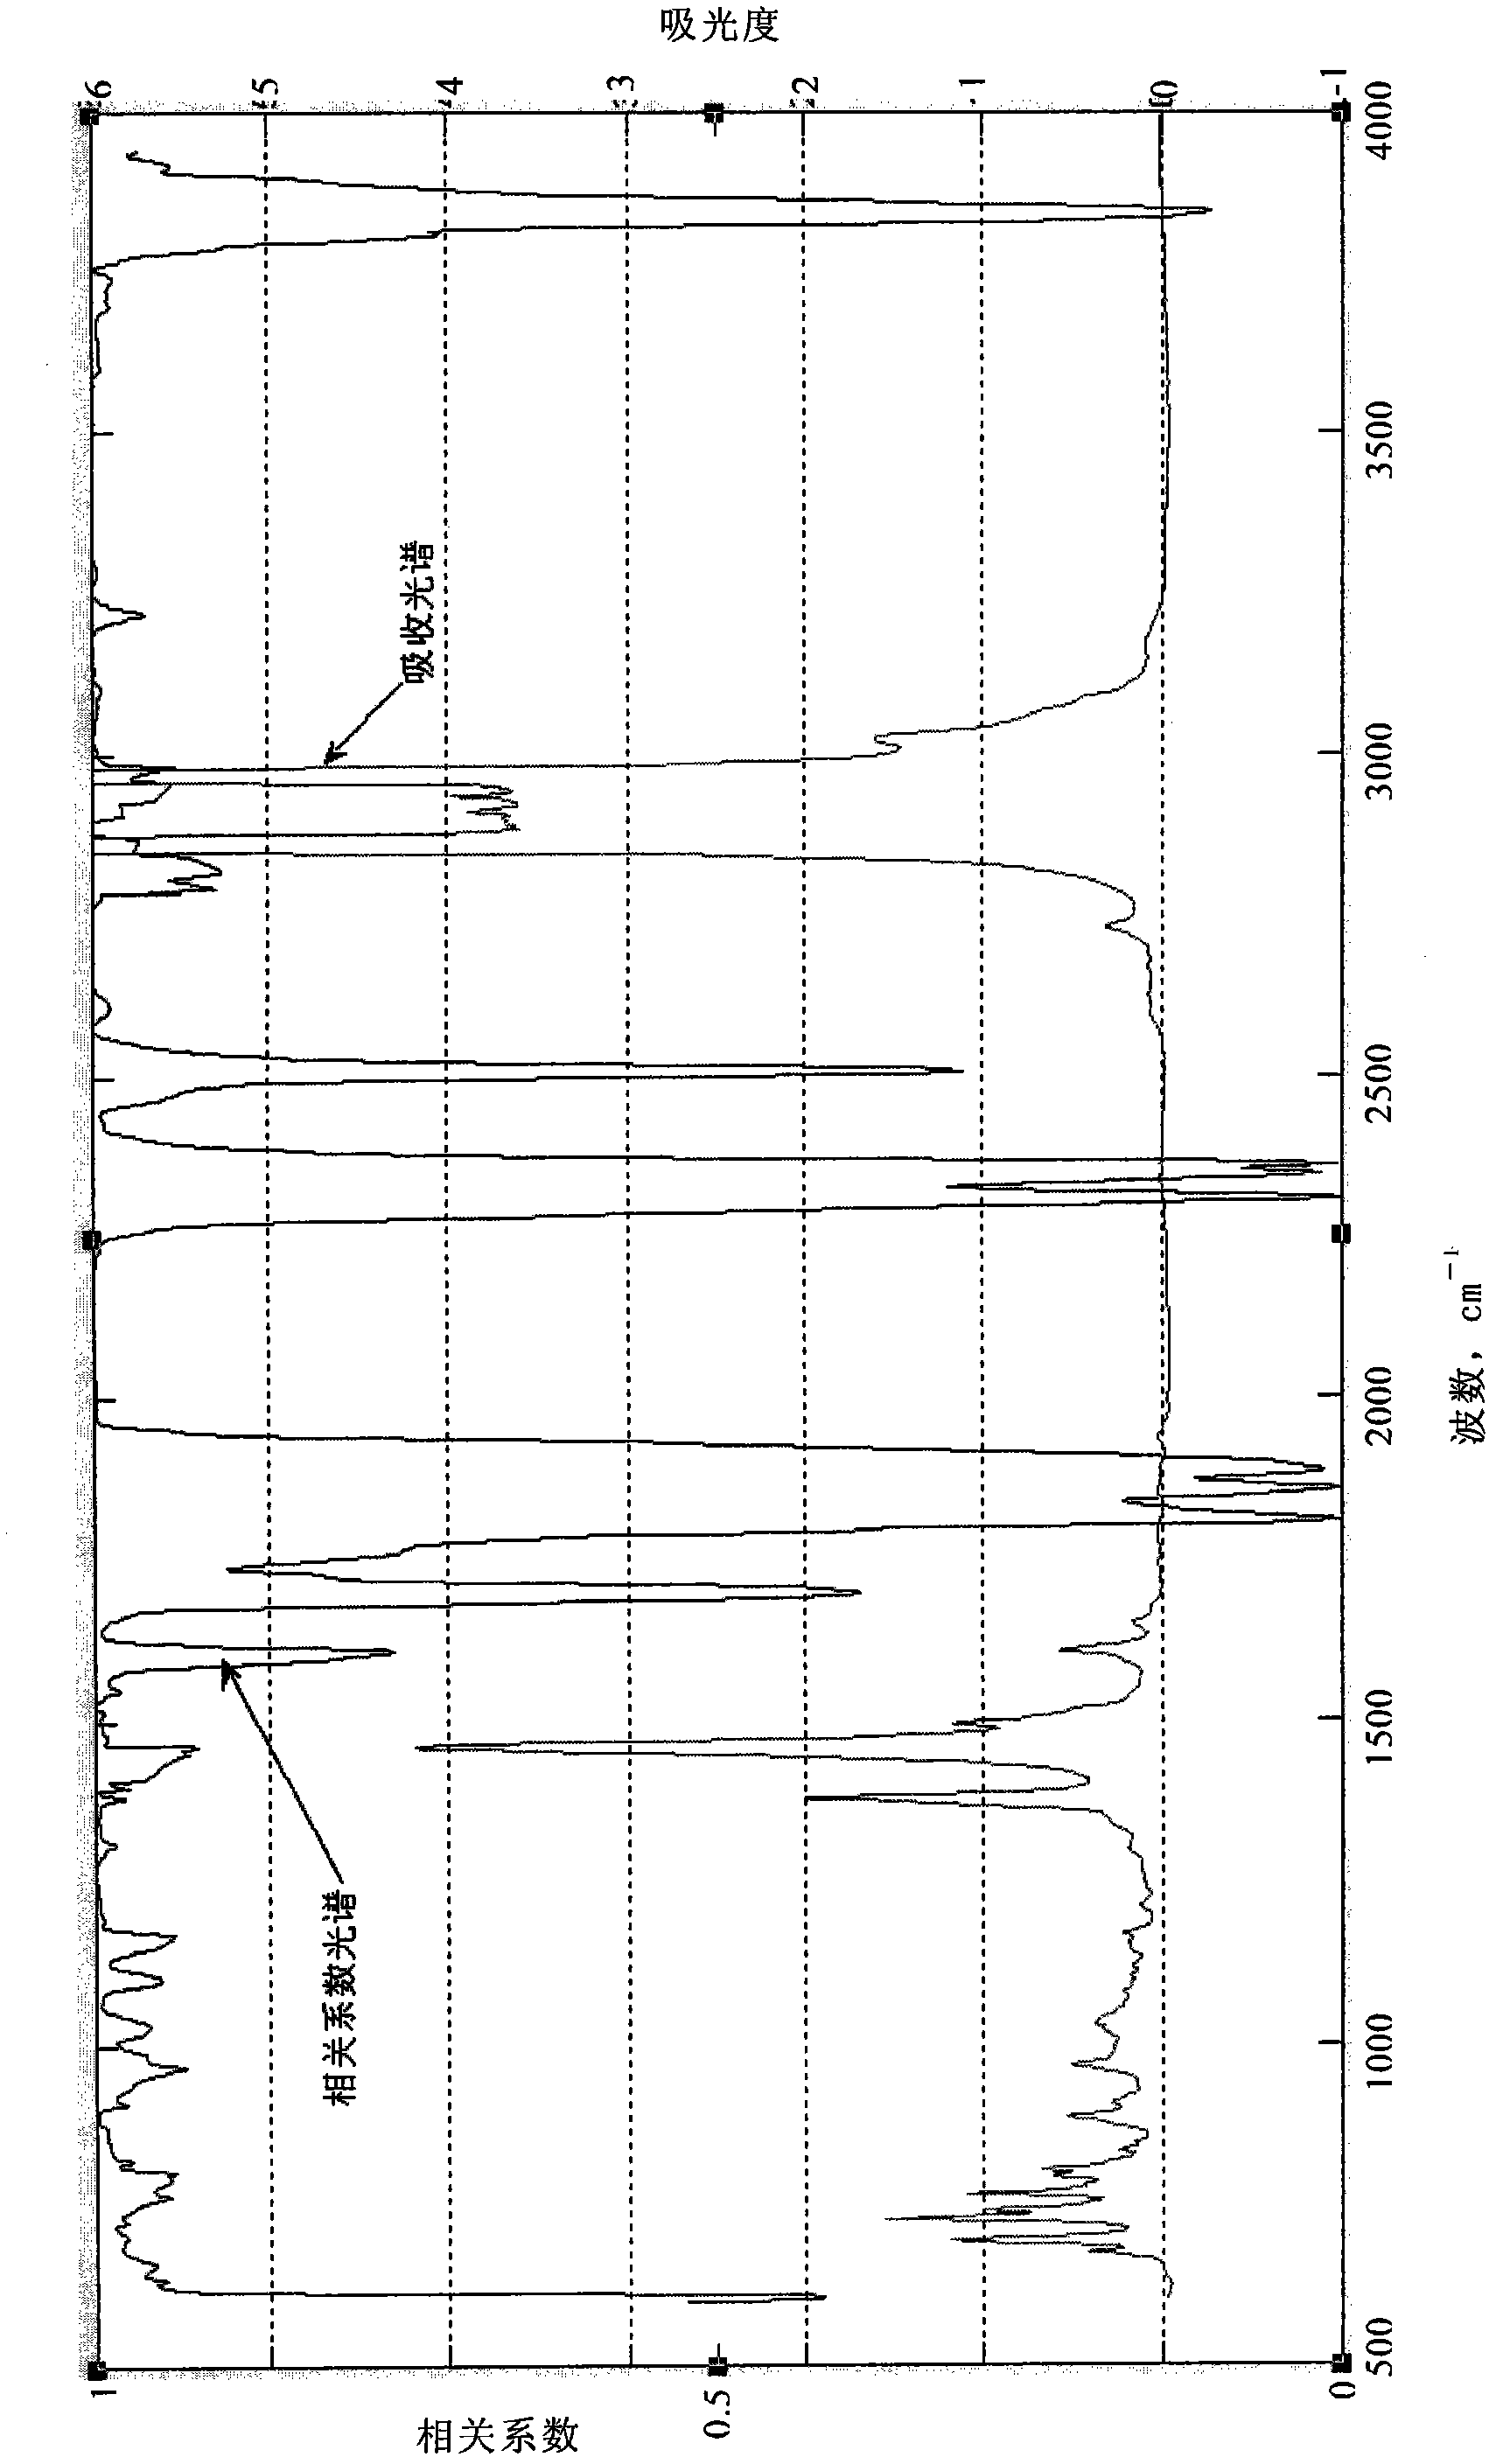 Mid-infrared spectrum method for quickly identifying engine fuel type